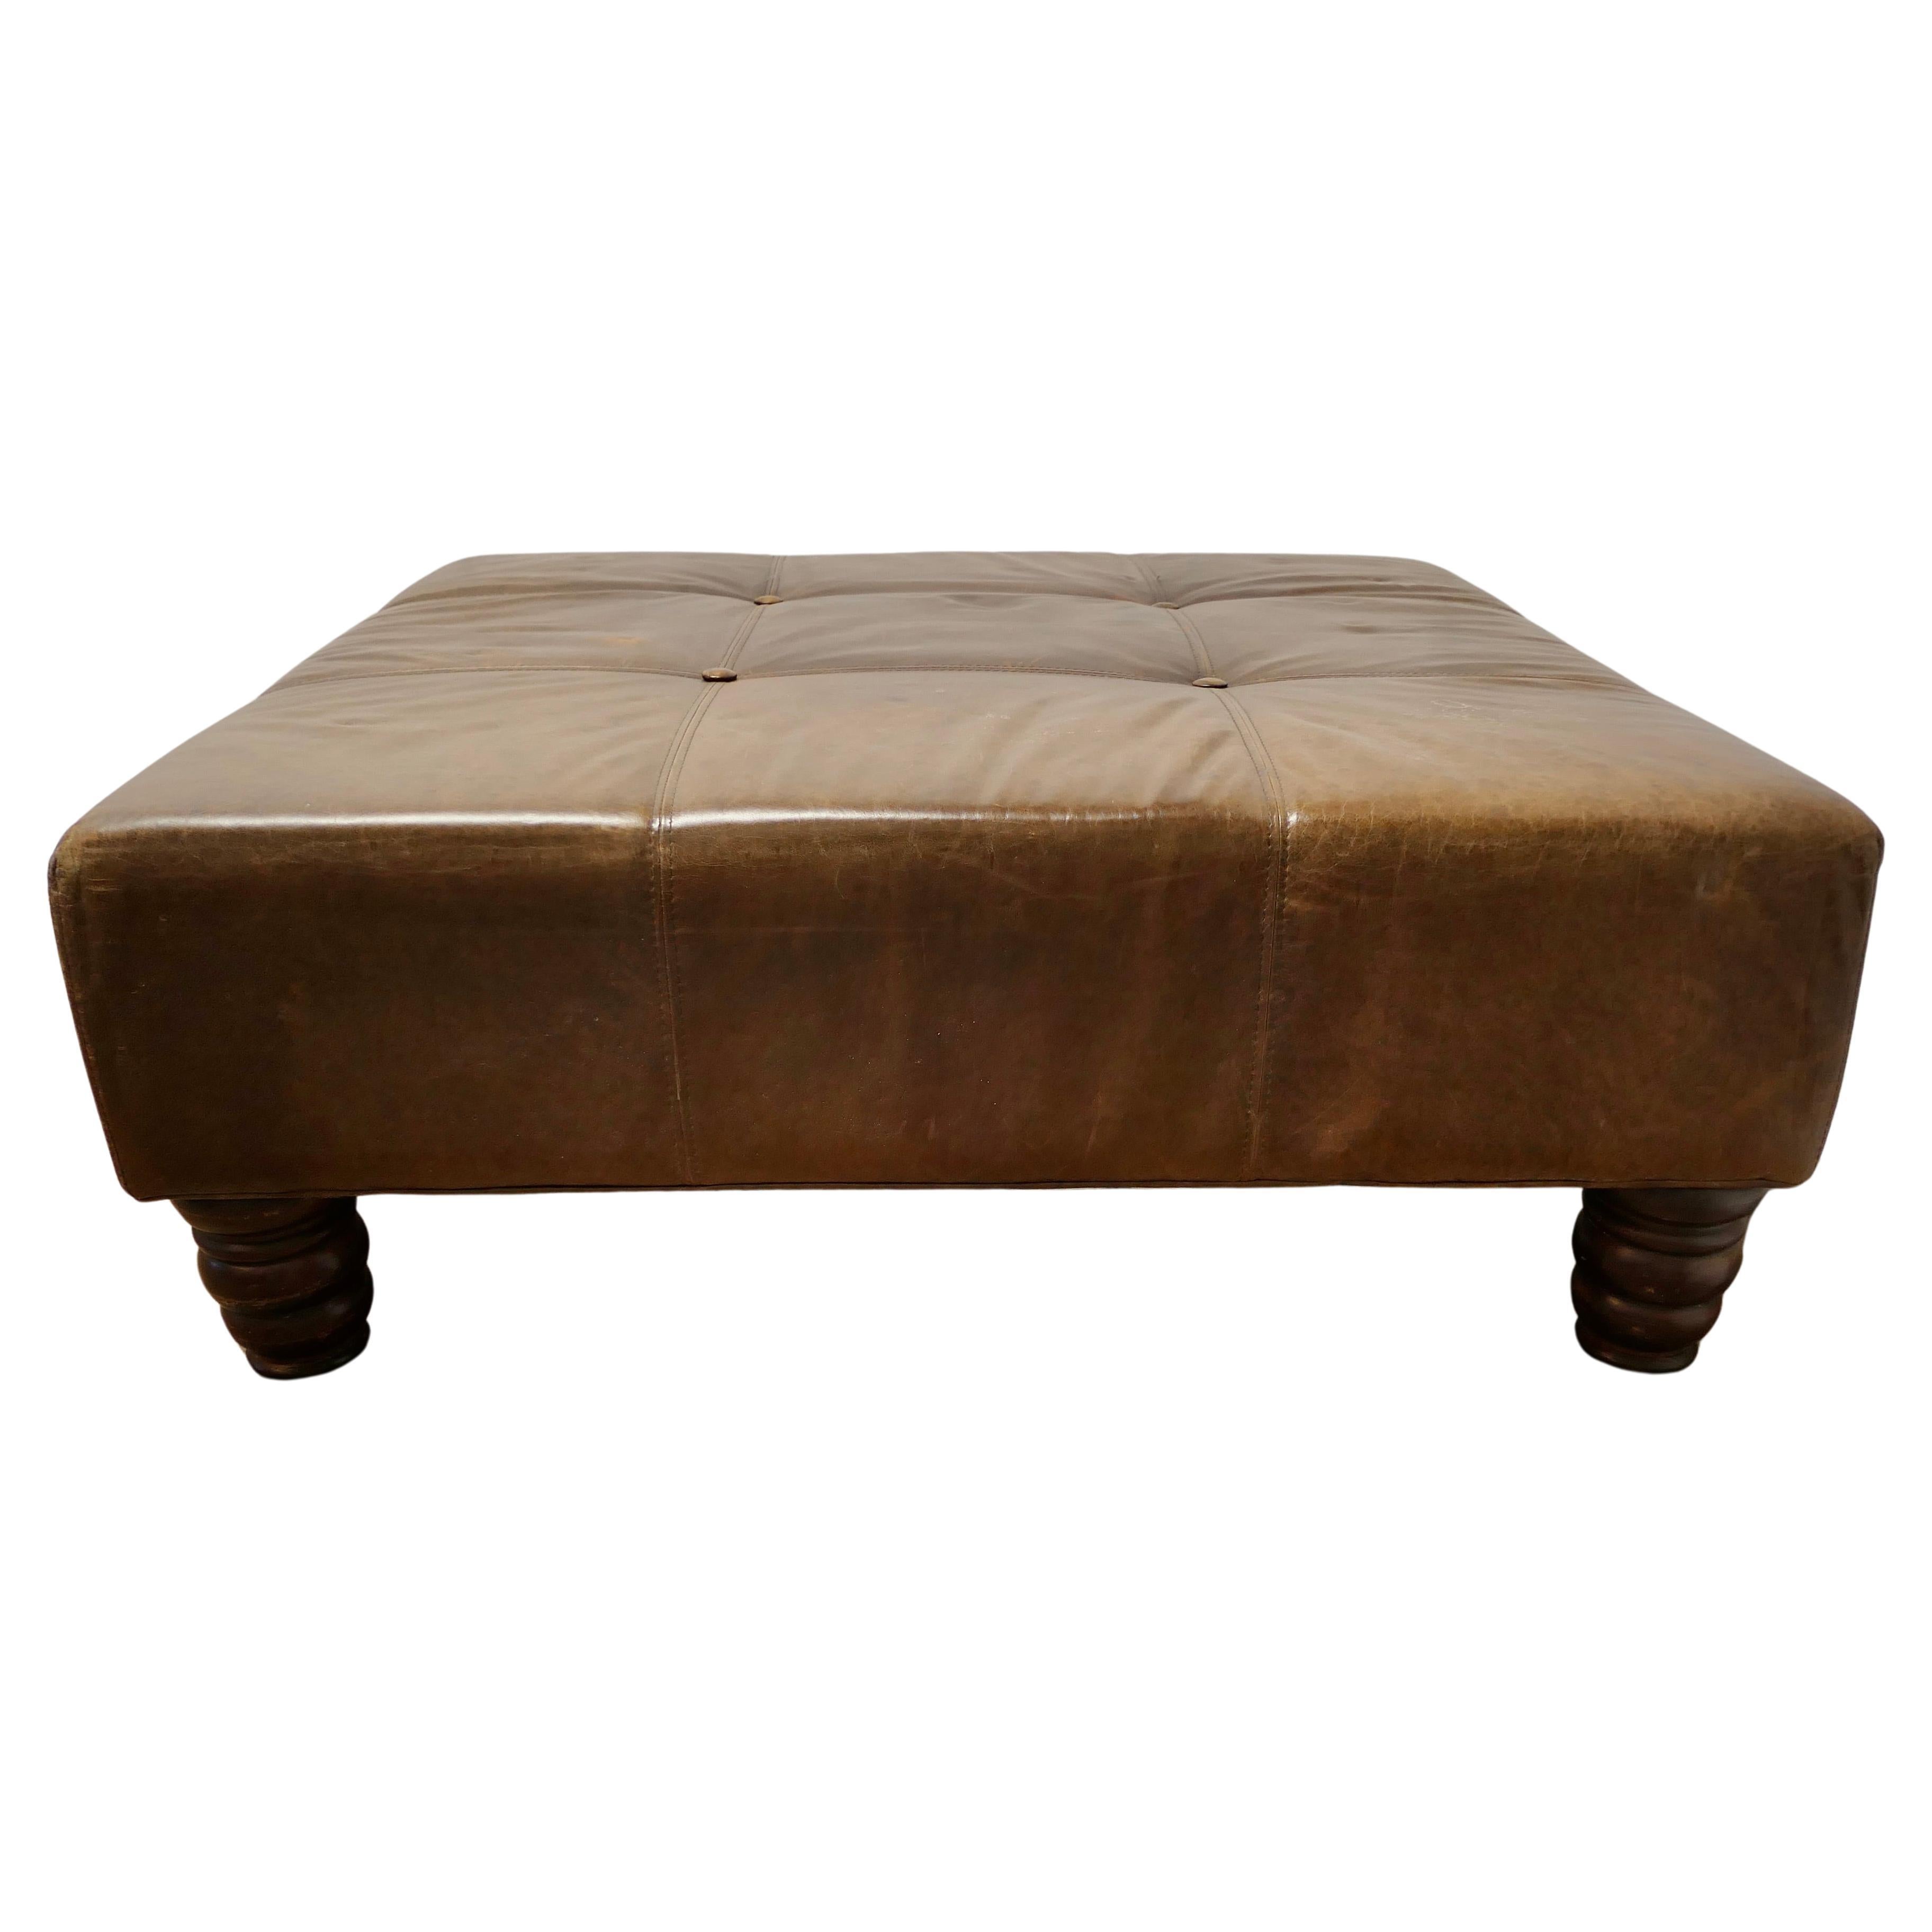 Extra Large Leather Chesterfield Ottoman Seat or Centre Coffee Table   This is a For Sale